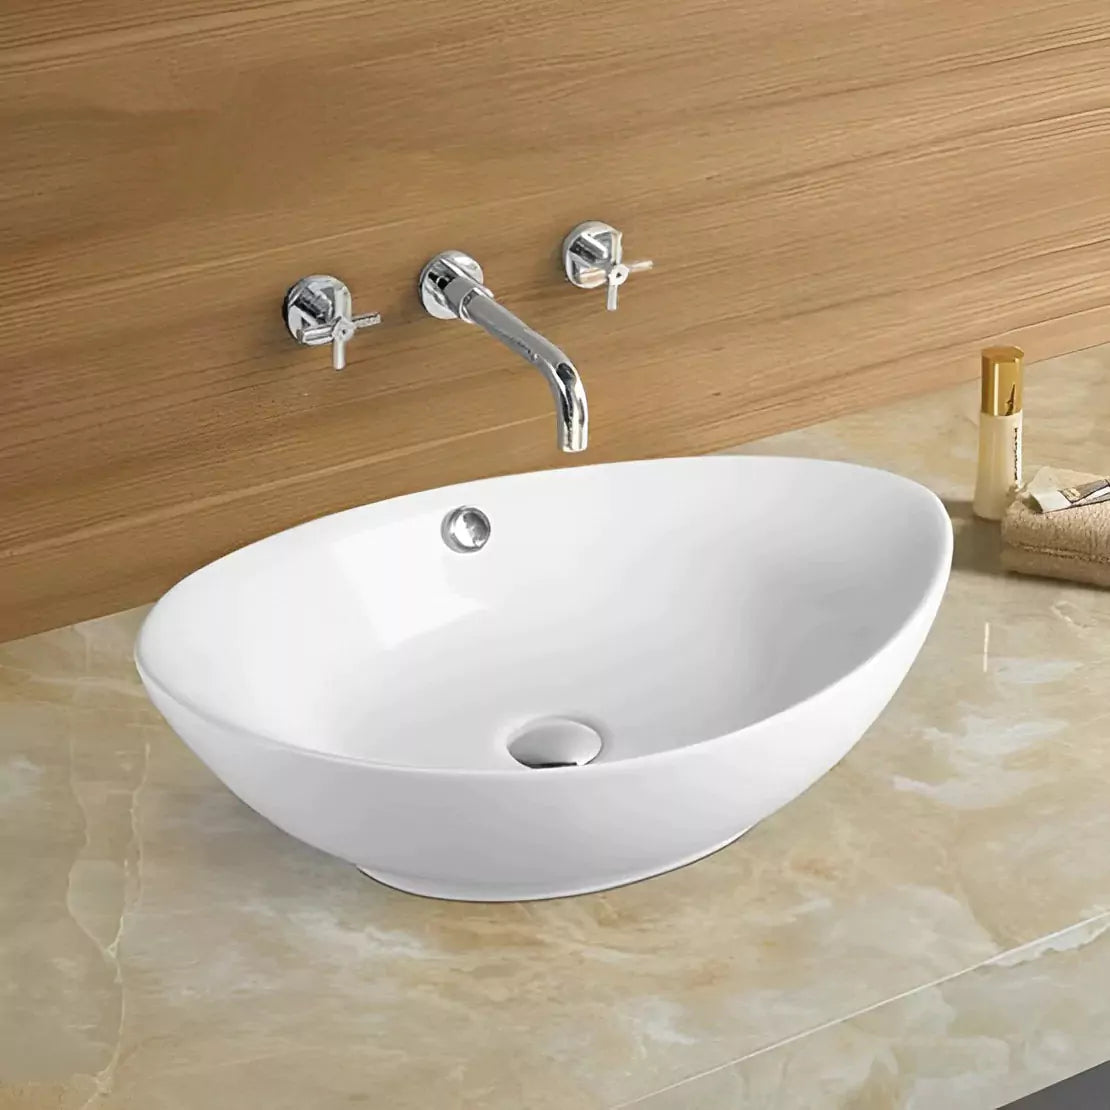 Above Counter Basin 570mm : Compact, Stylish Basin Perched Above The Counter-Gloss White-PA5839